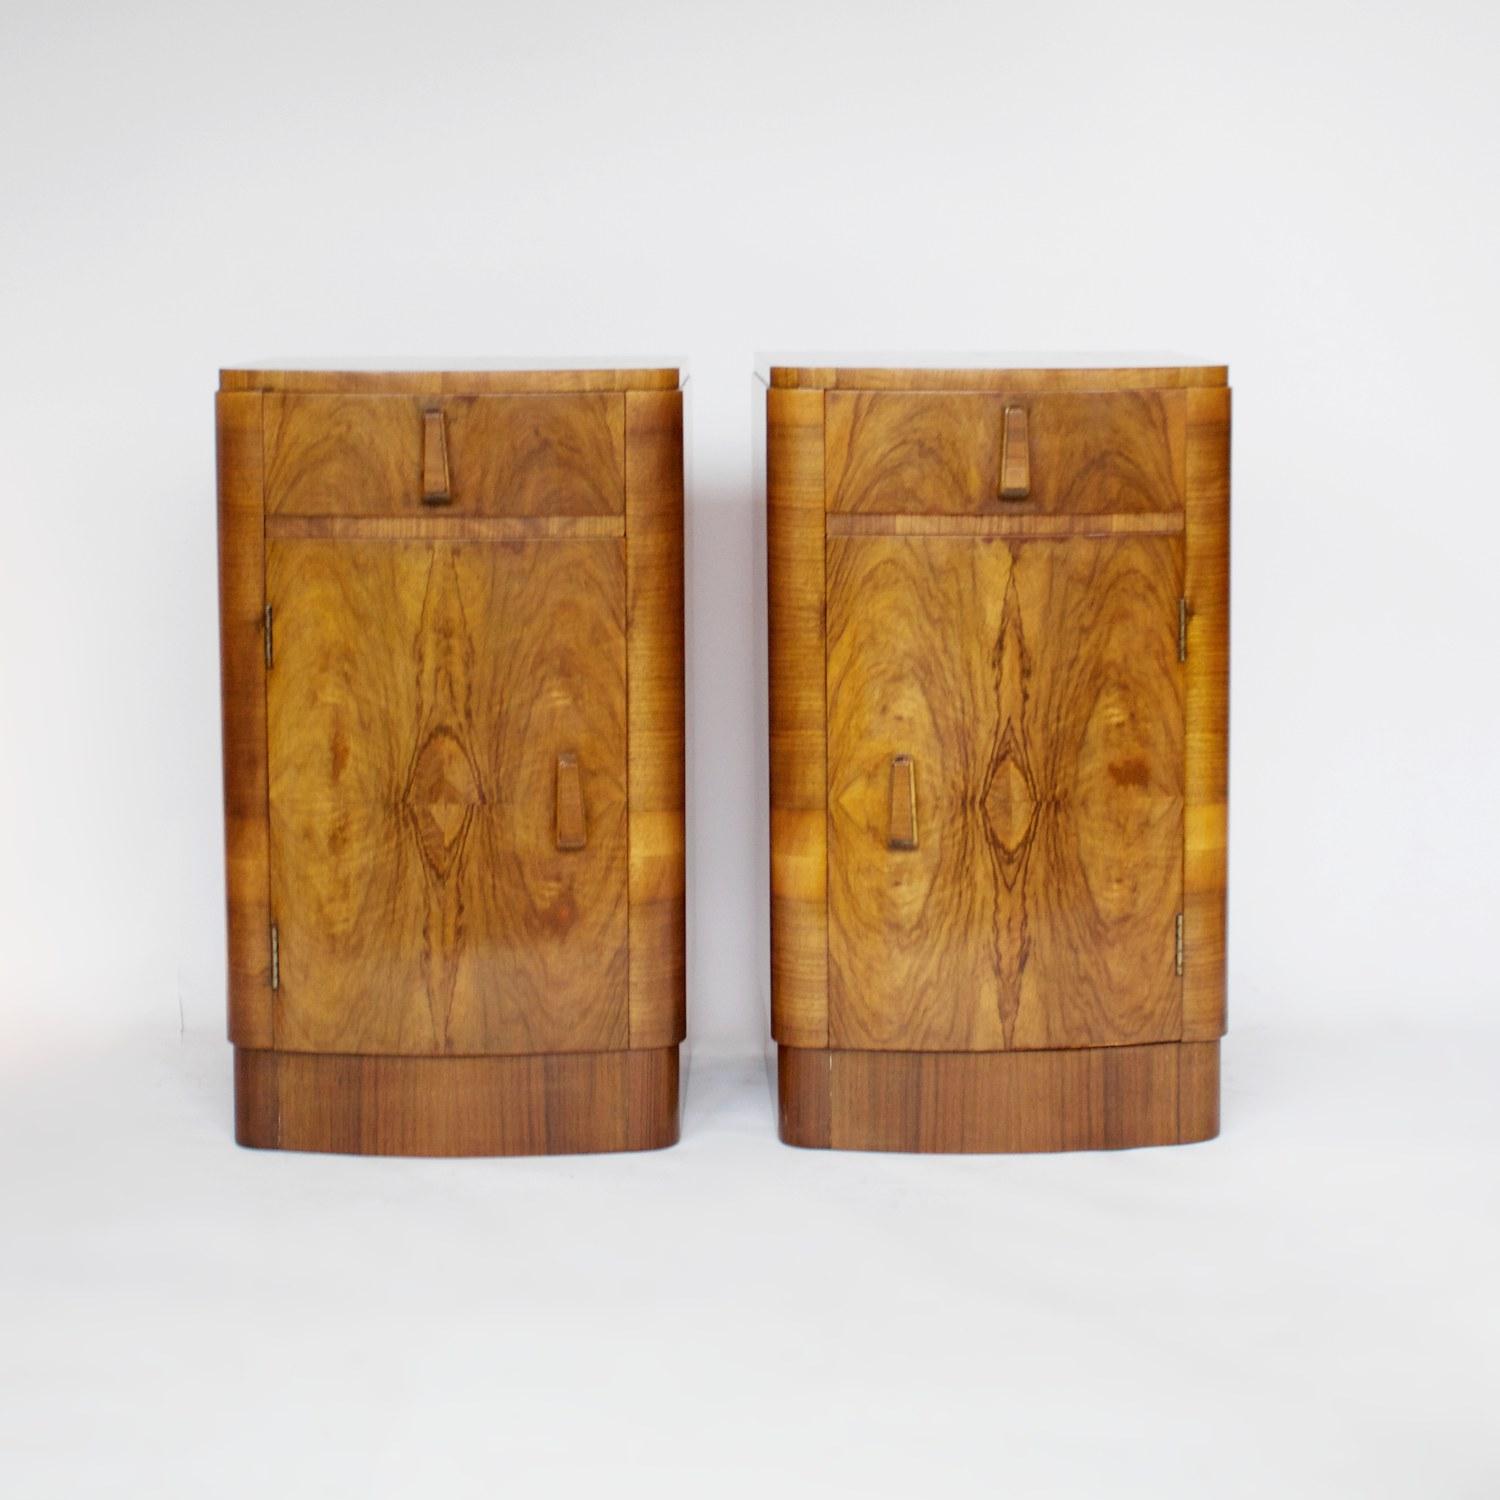 English Pair of Art Deco Bedside Cabinets